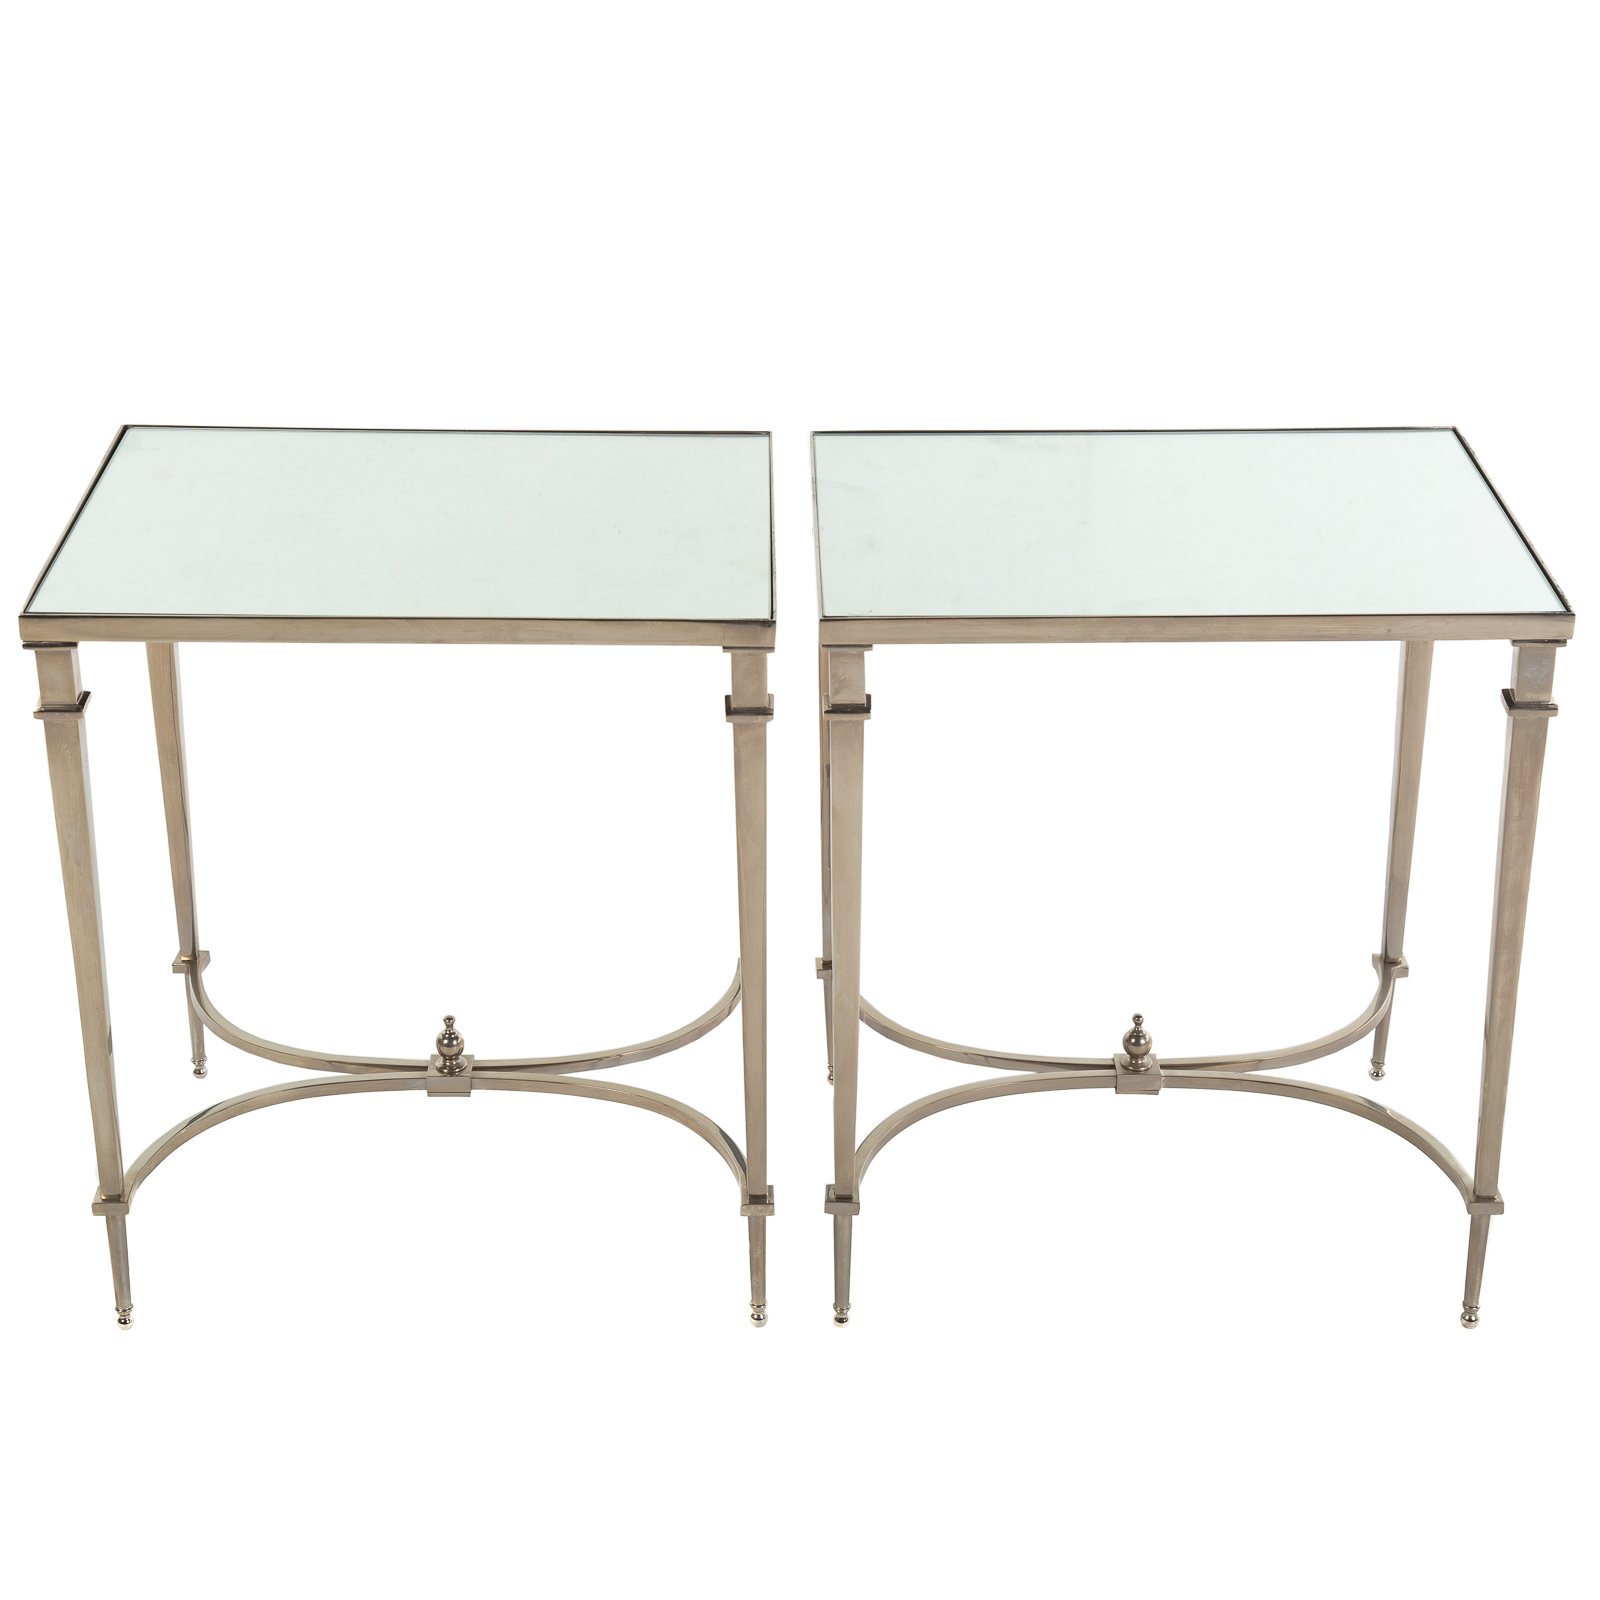 A PAIR OF CONTEMPORARY SIDE TABLES